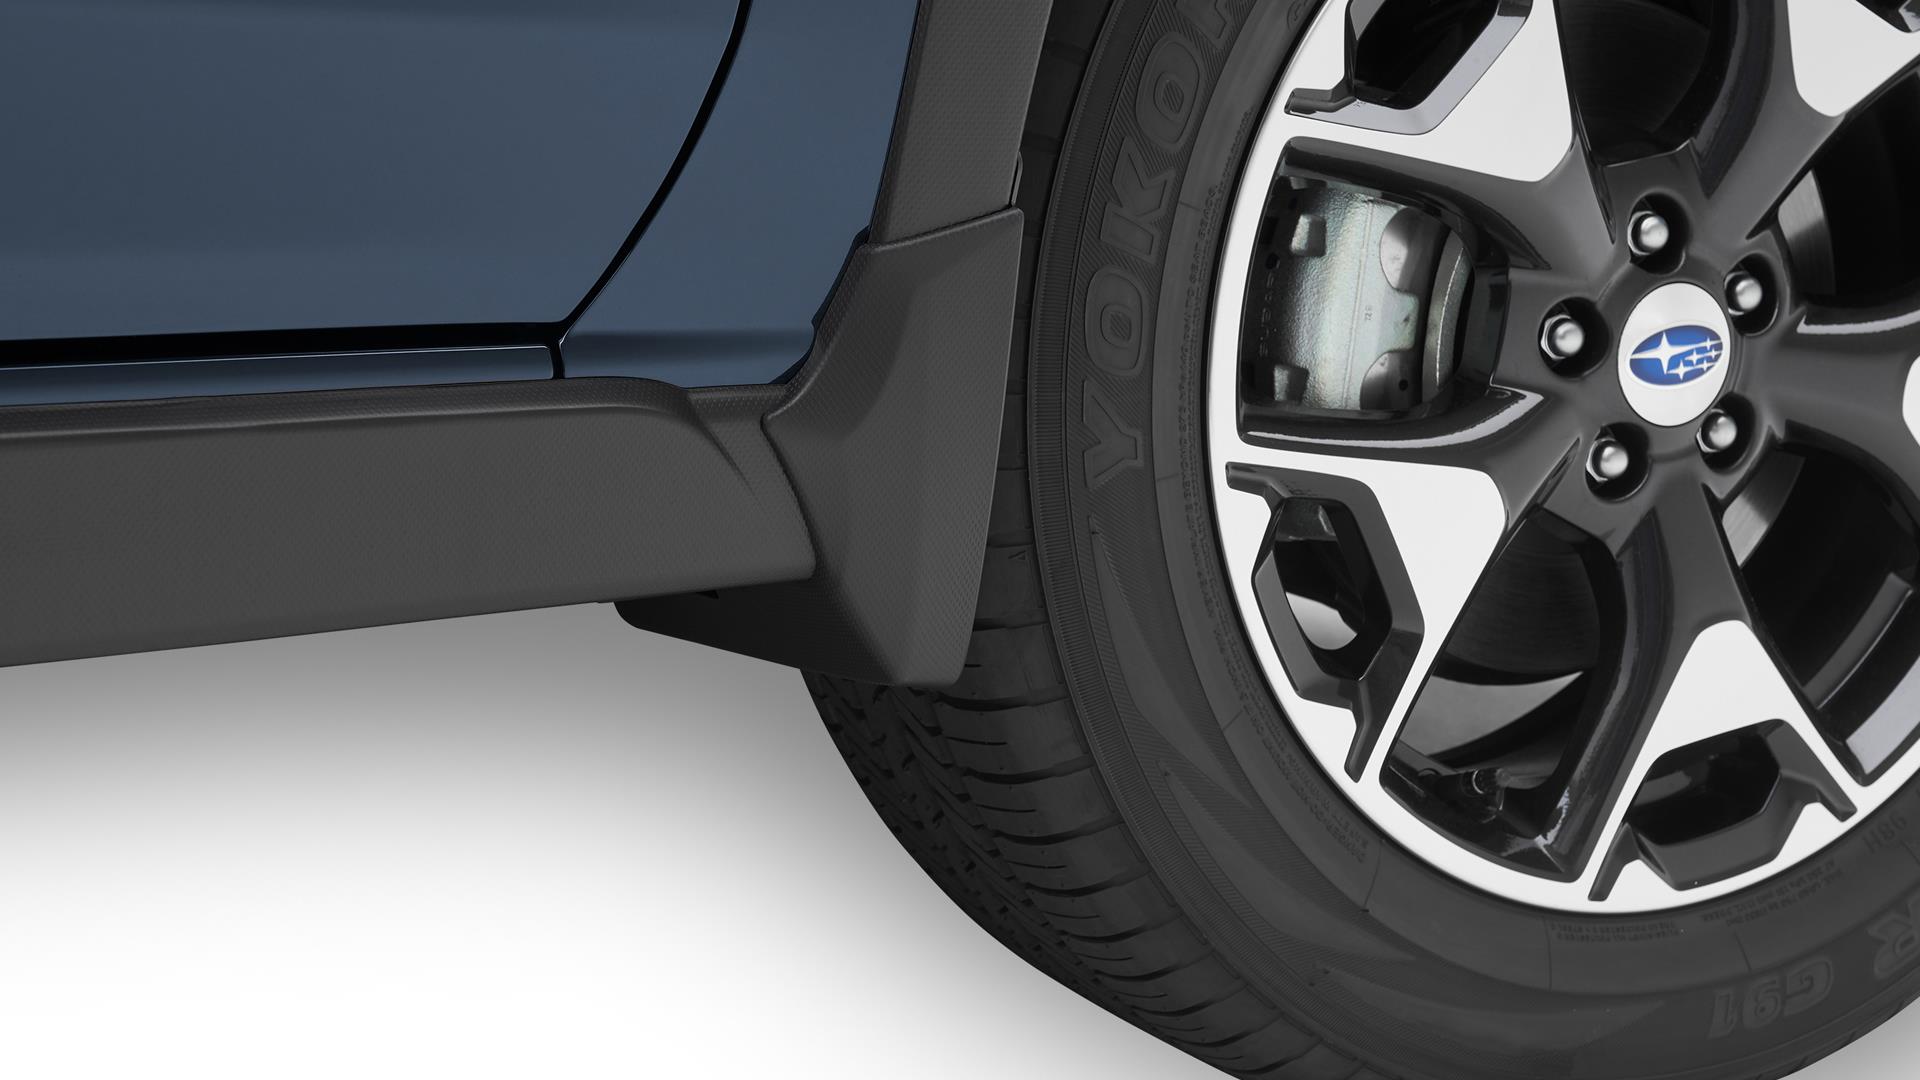 Image of Splash Guard. Helps protect vehicle. image for your 1996 Subaru